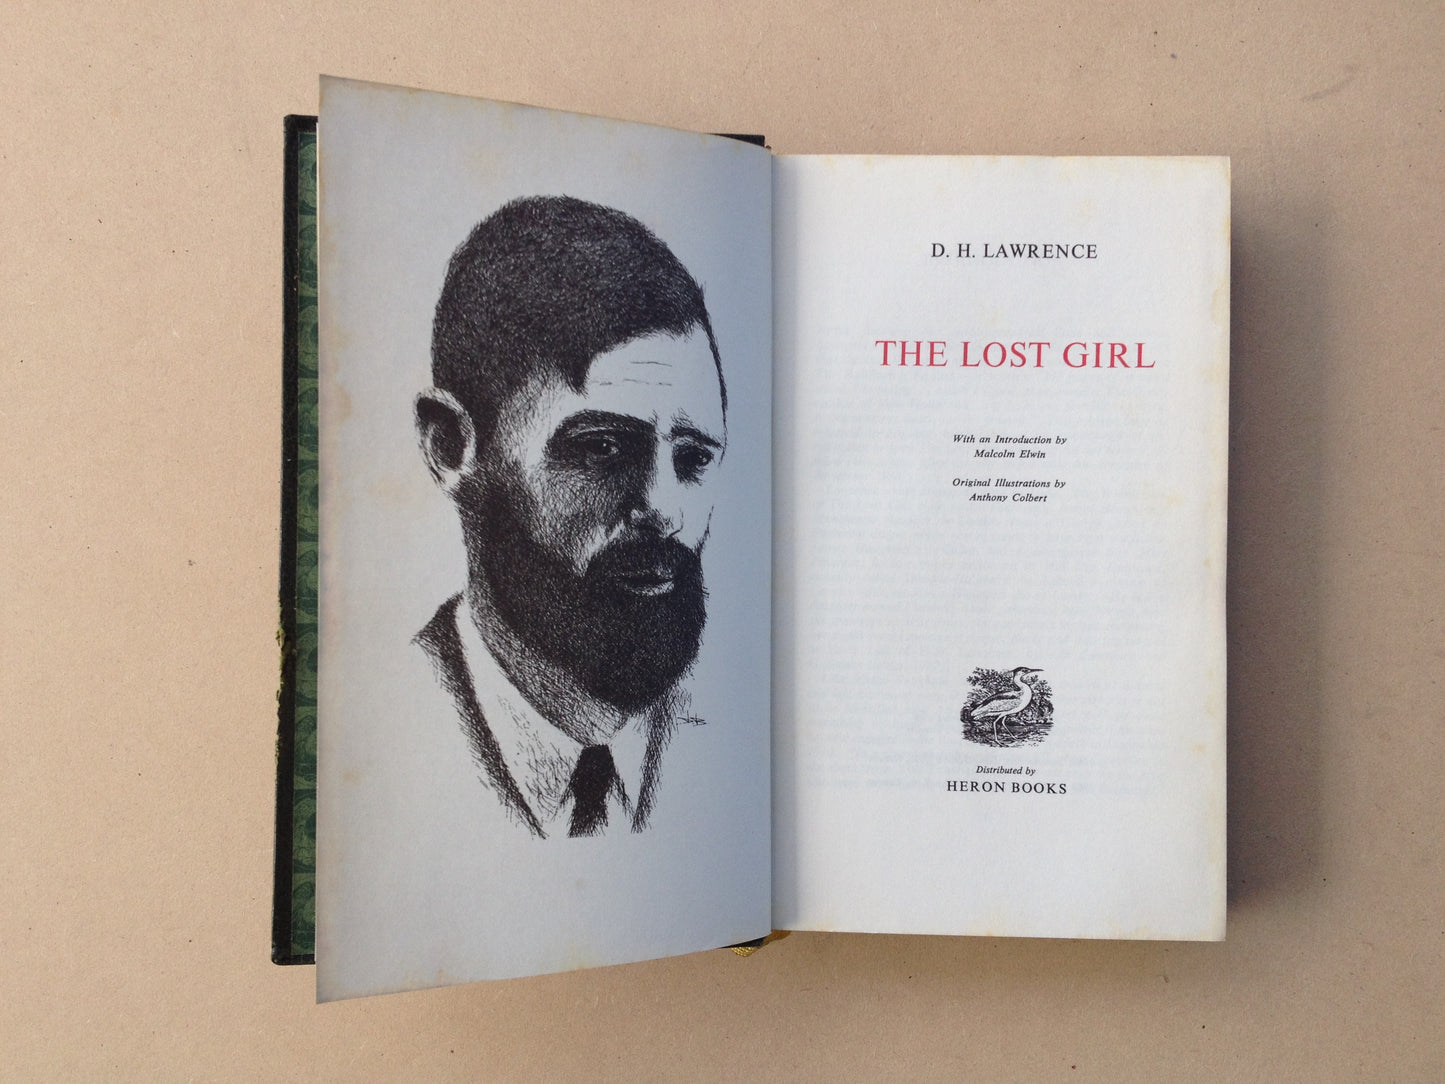 DH Lawrence Complete Works The Lost Girl by Heron Books London